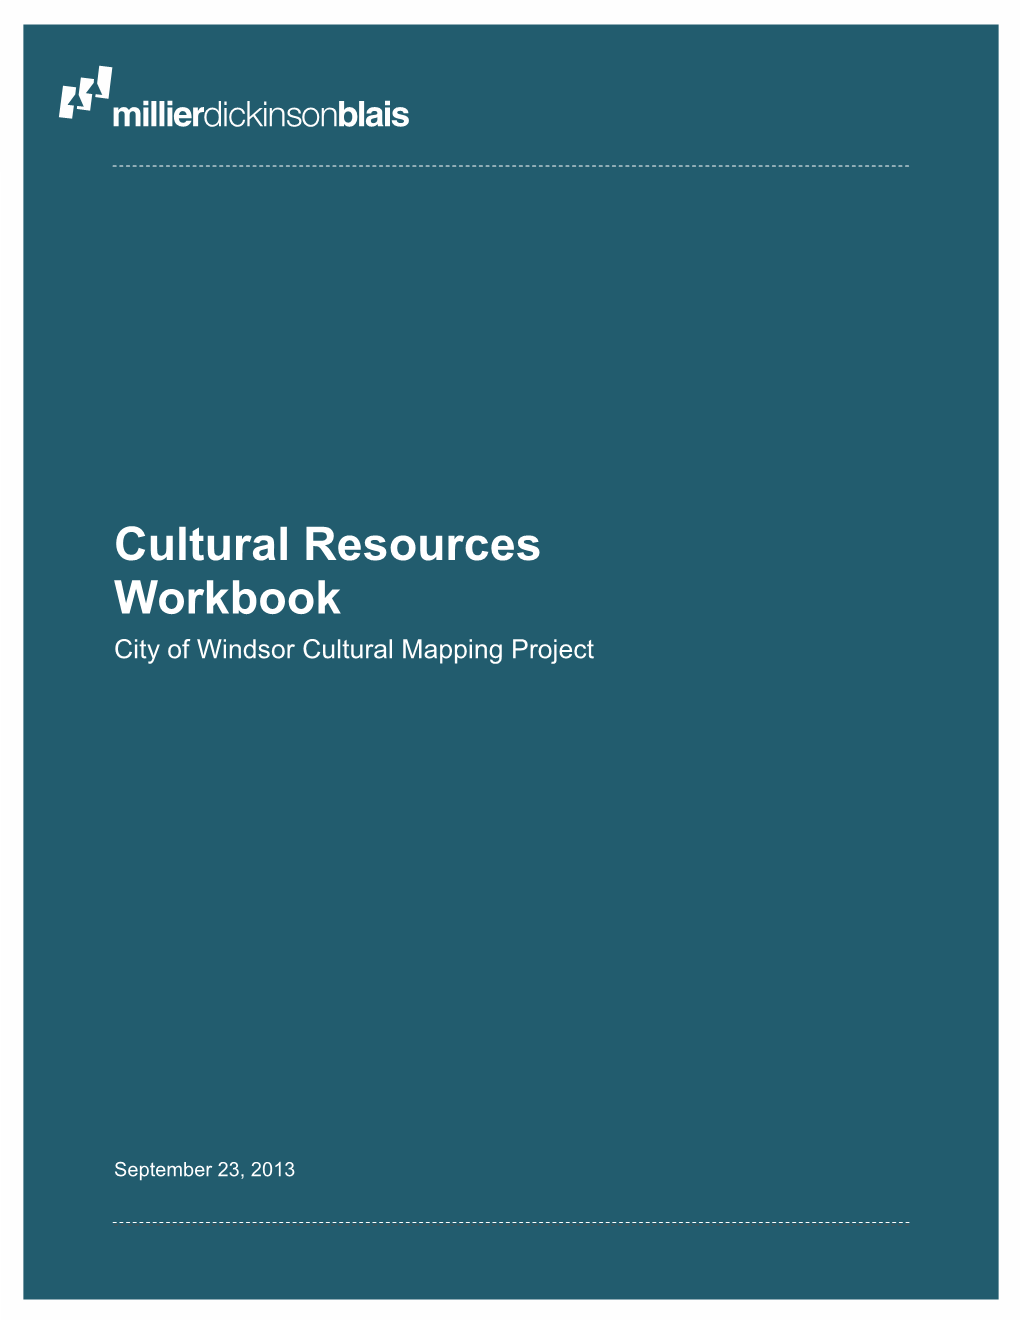 Cultural Resources Workbook City of Windsor Cultural Mapping Project